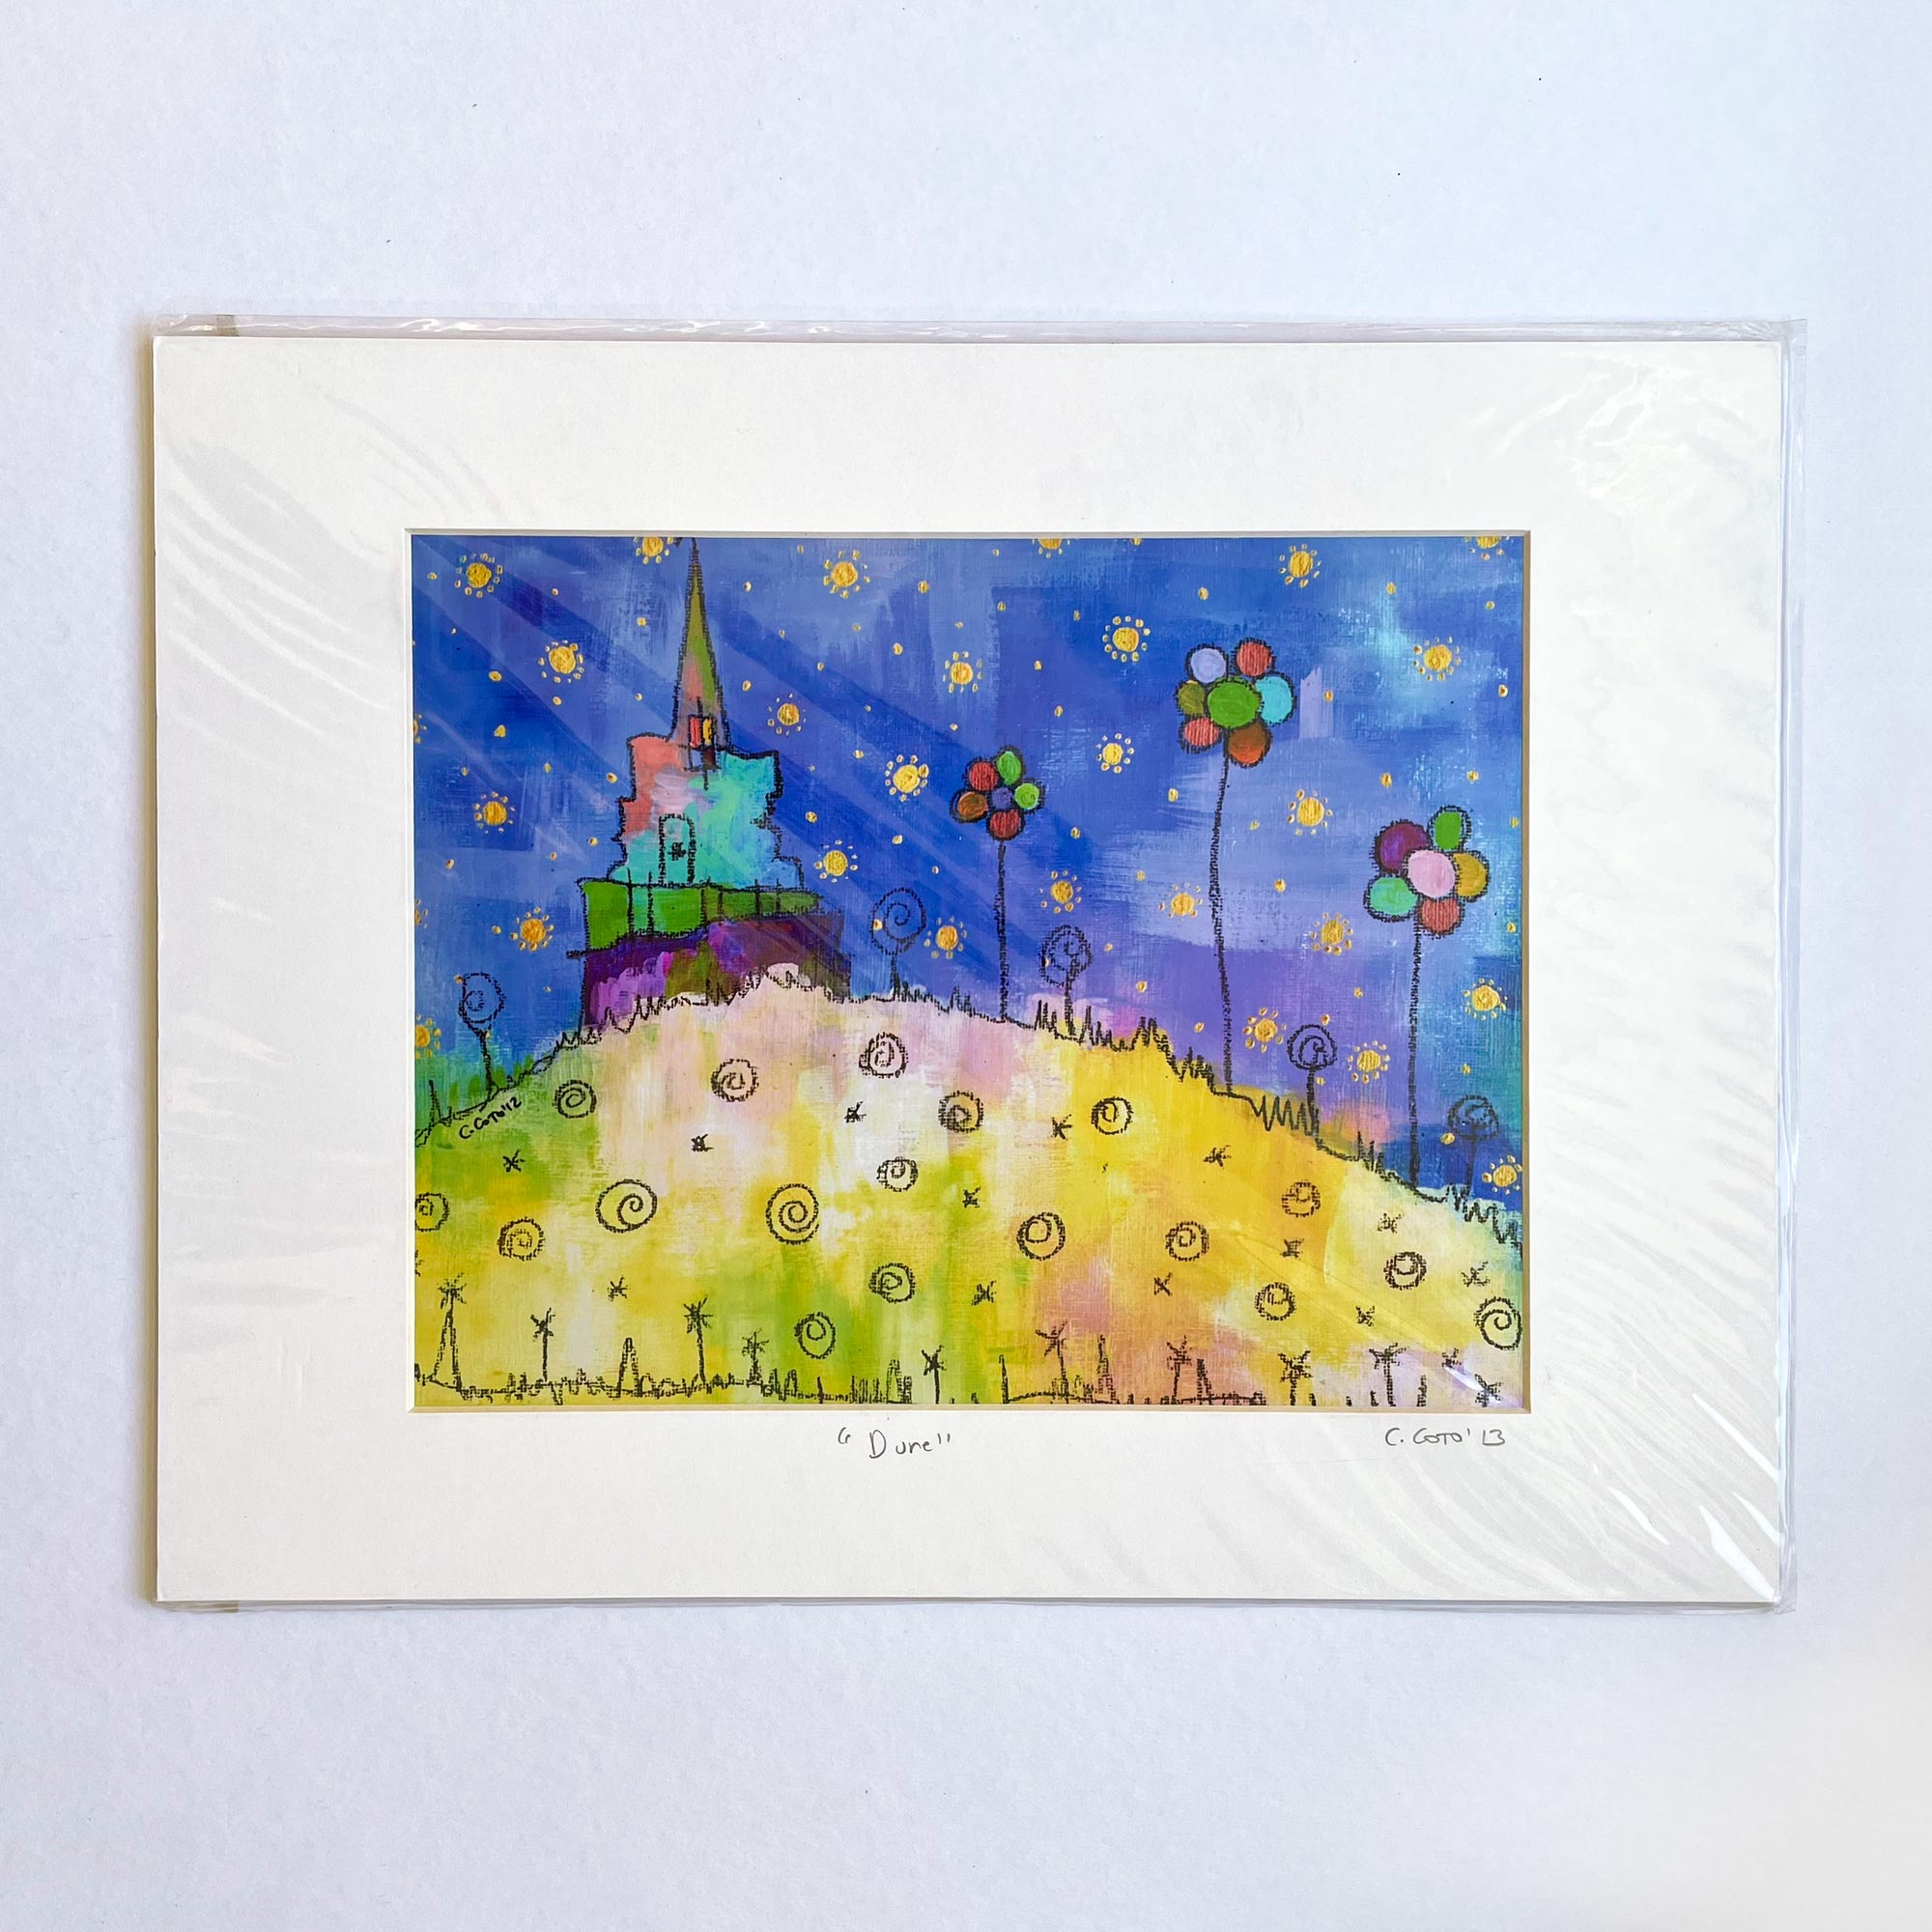 Dune - Matted - $5 Sale Print